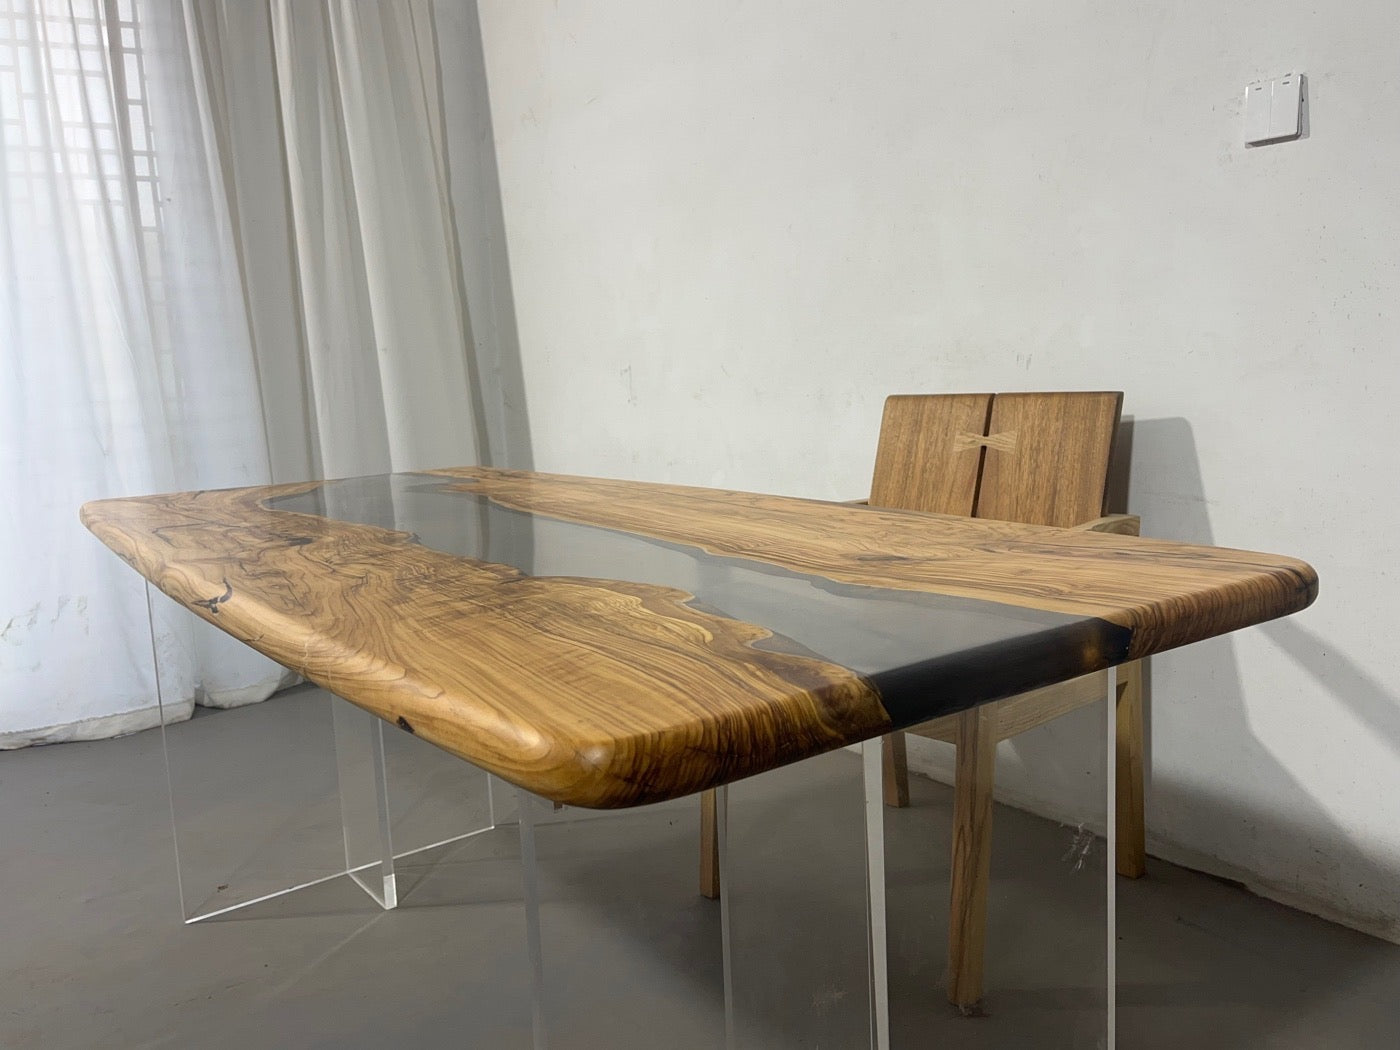 Clear Epoxy Resin Table Top, Resin Epoxy Table, Epoxy Resin For Tables